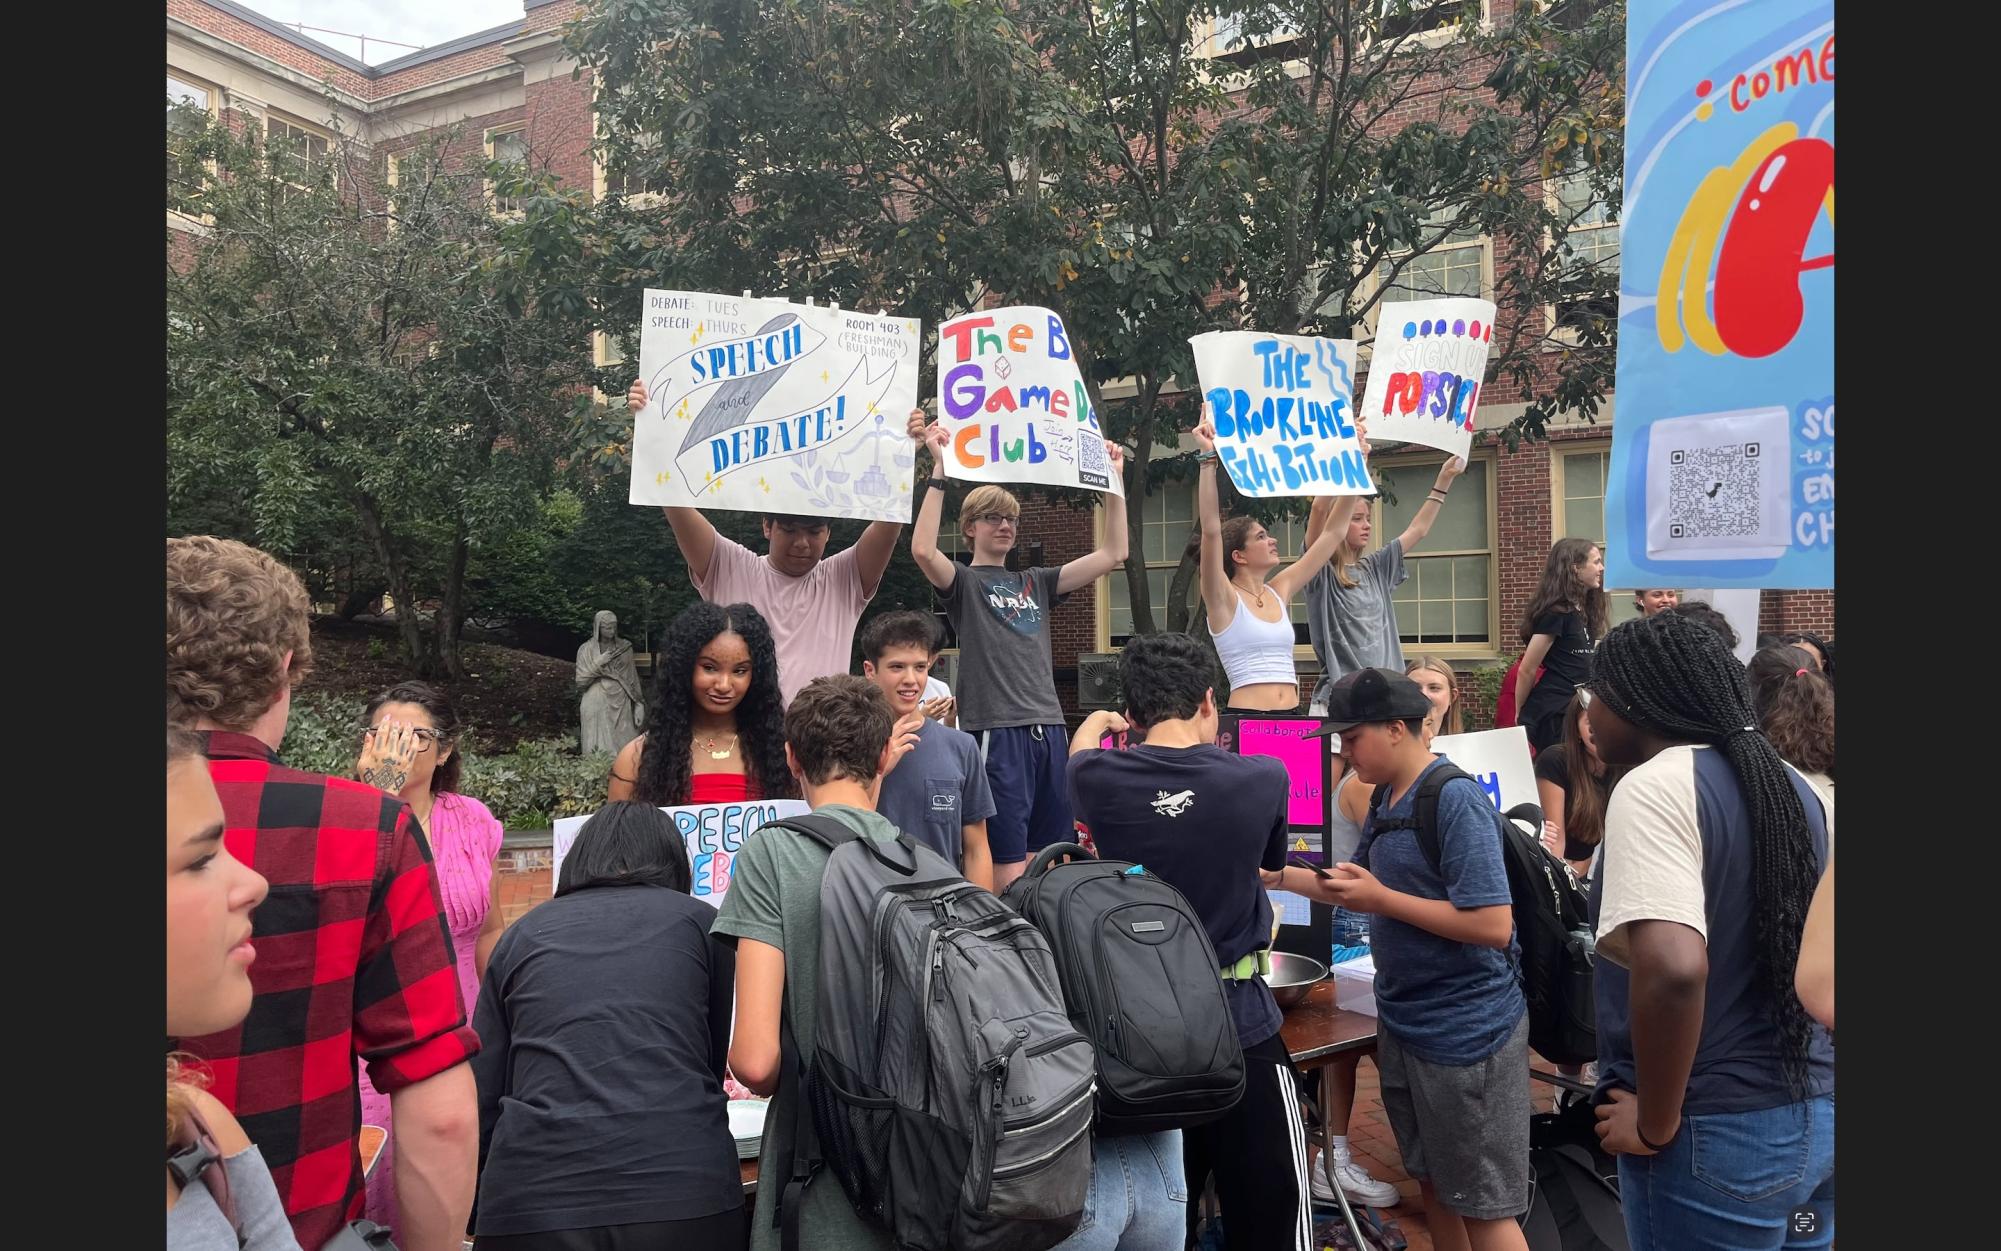 The Club Fair, held in the quad on Wednesday, Sept. 13, helped over 120 clubs advertise themselves to the events many attendees. Club representatives held signs, interacted with curious students and recorded emails in an effort to recruit possible members.